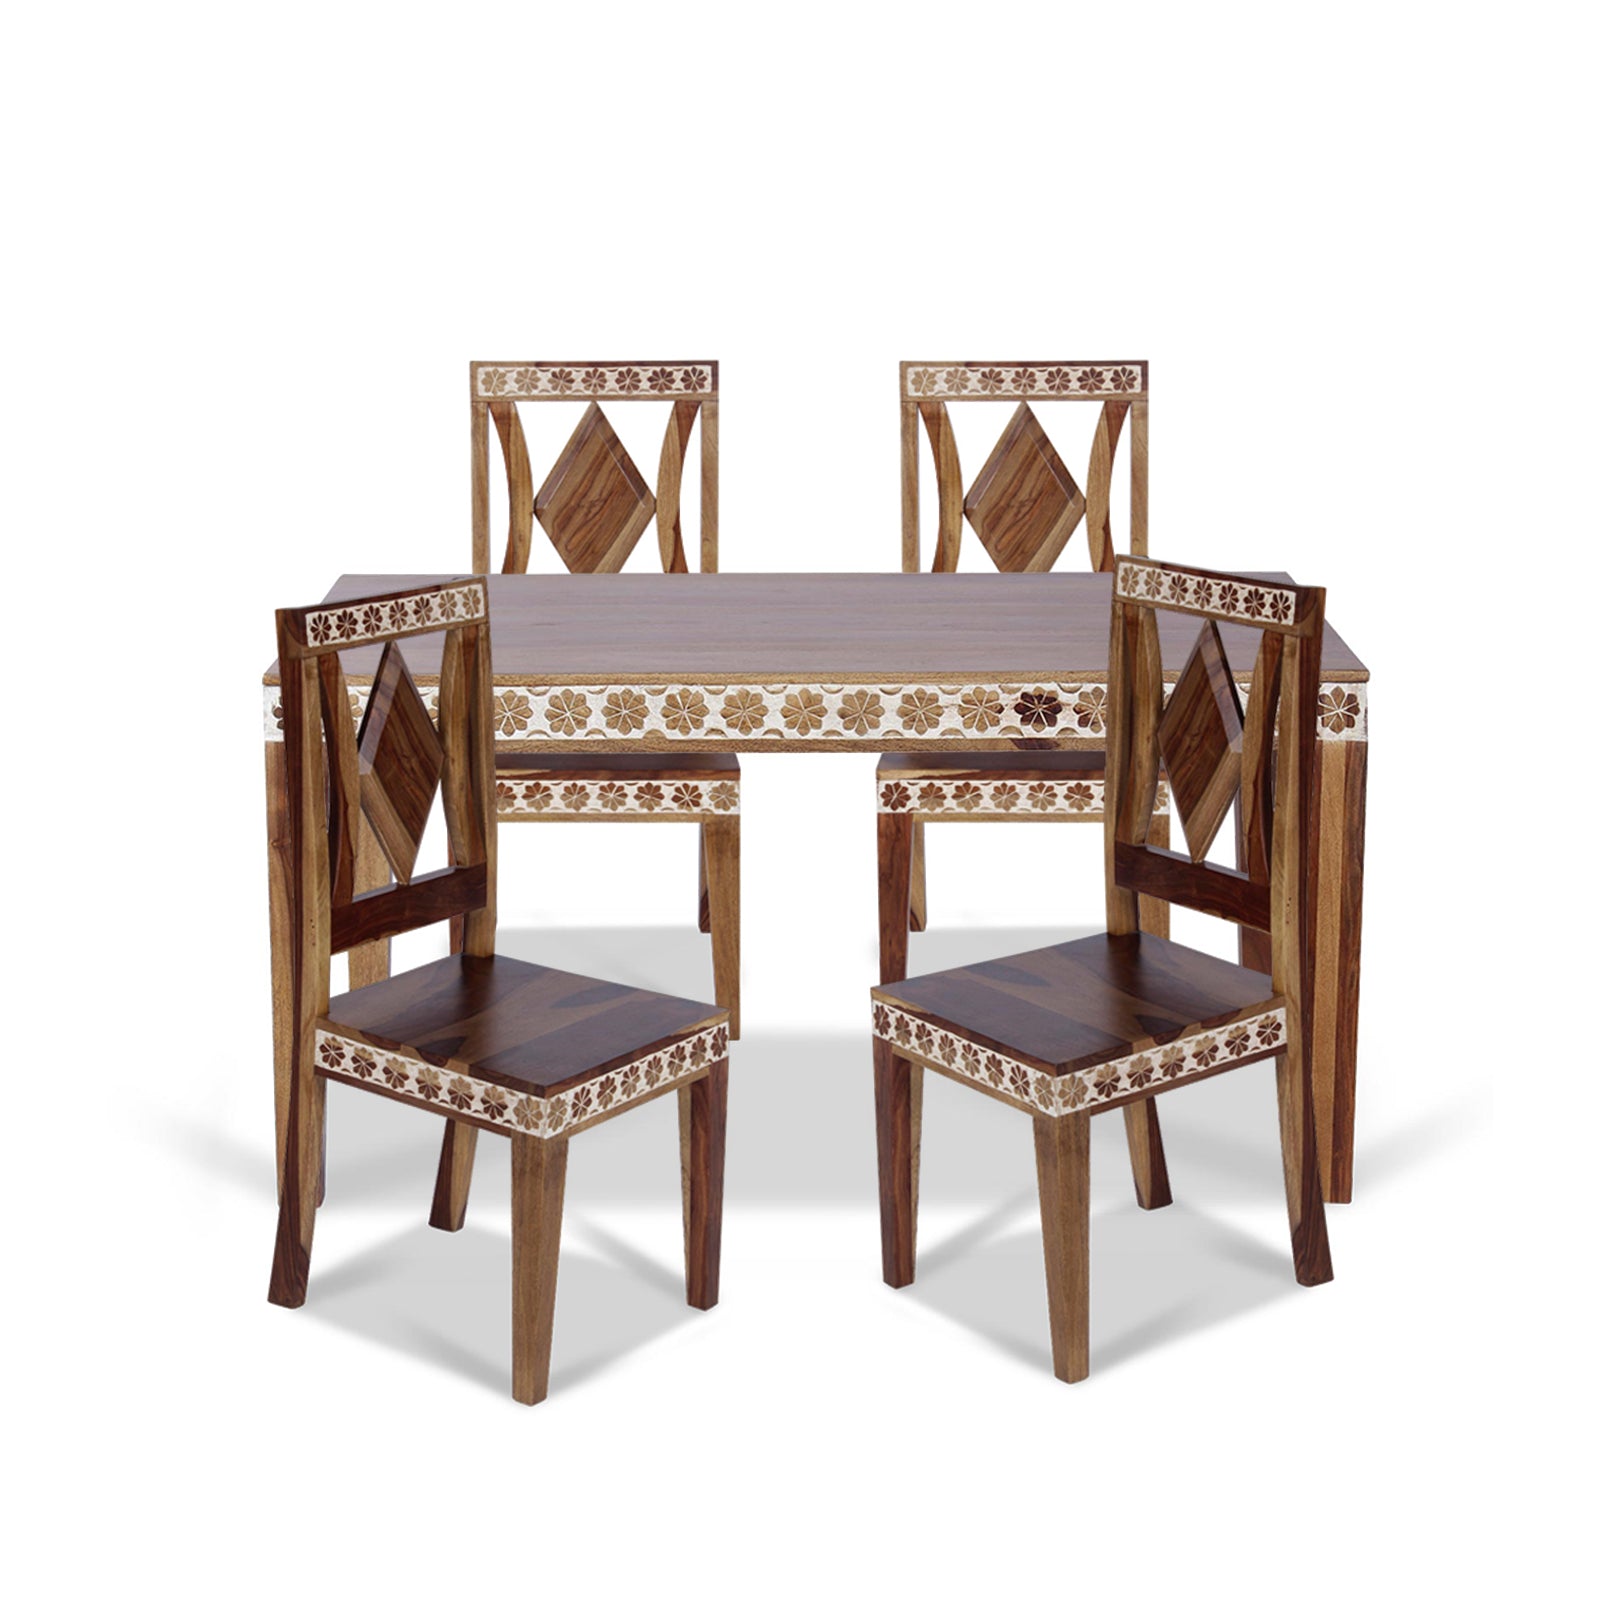 Odra Solid Wood Six Seater Dining Set